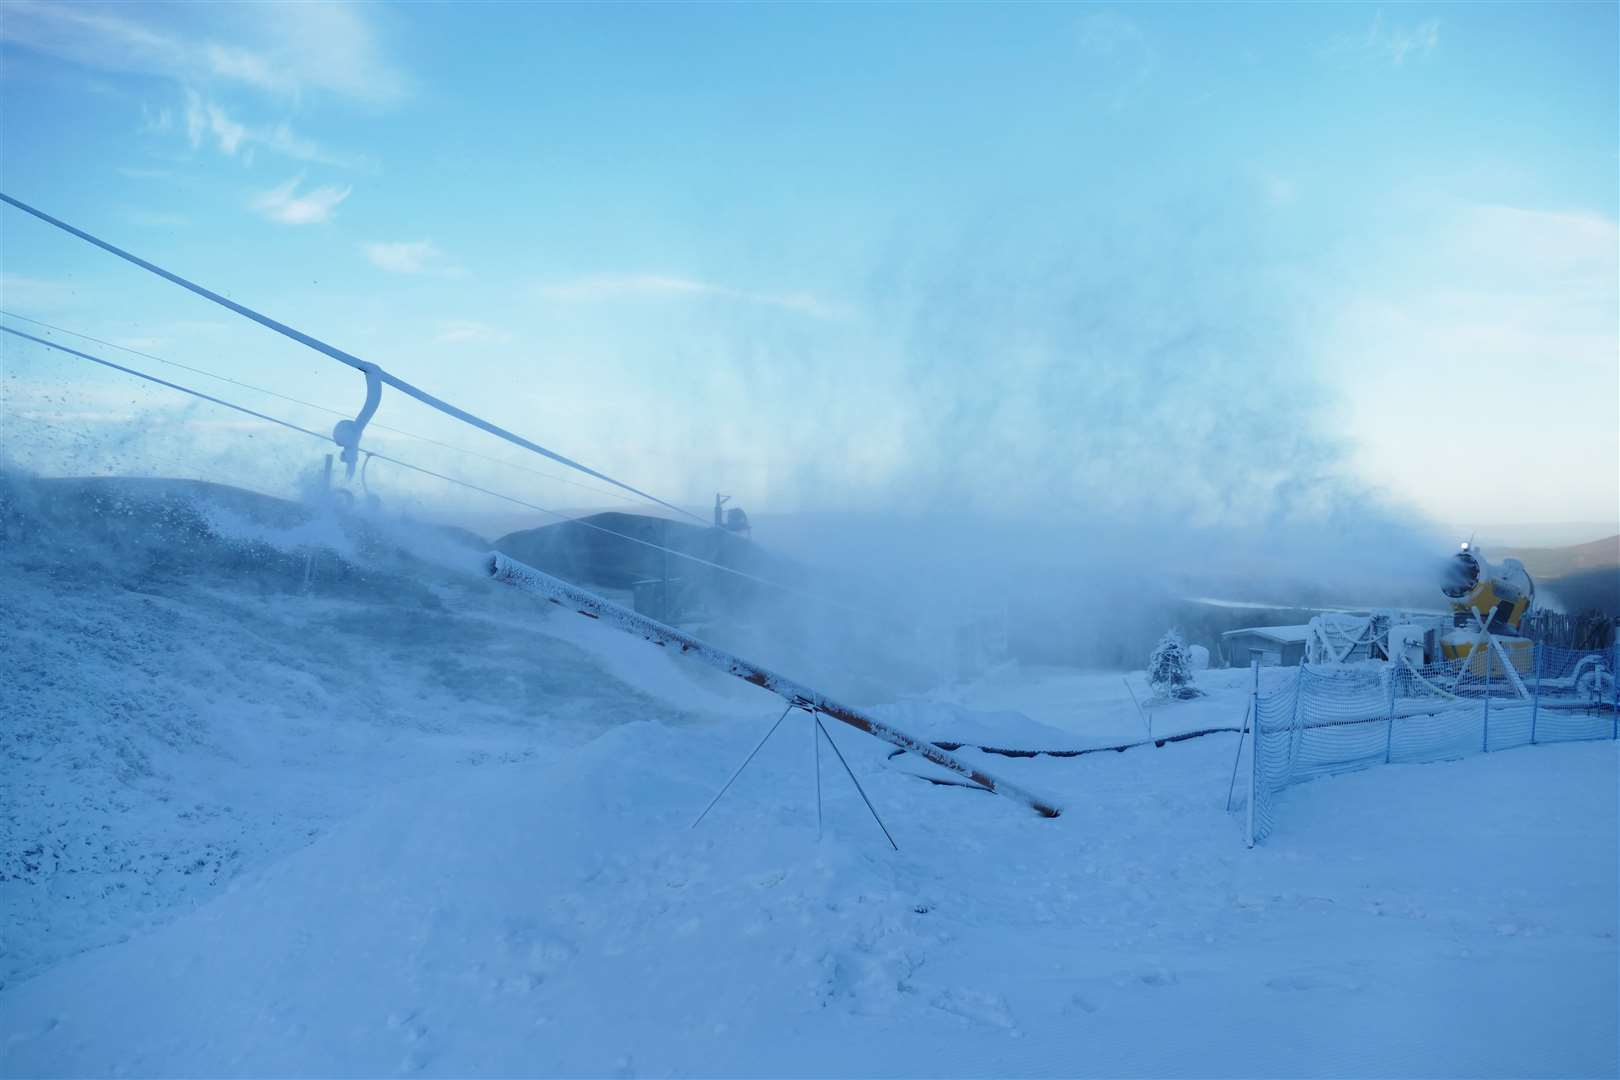 Snow-making has improved dramatically in recent years and is seen as a crucial way forward to help Scottish ski resorts to survive.